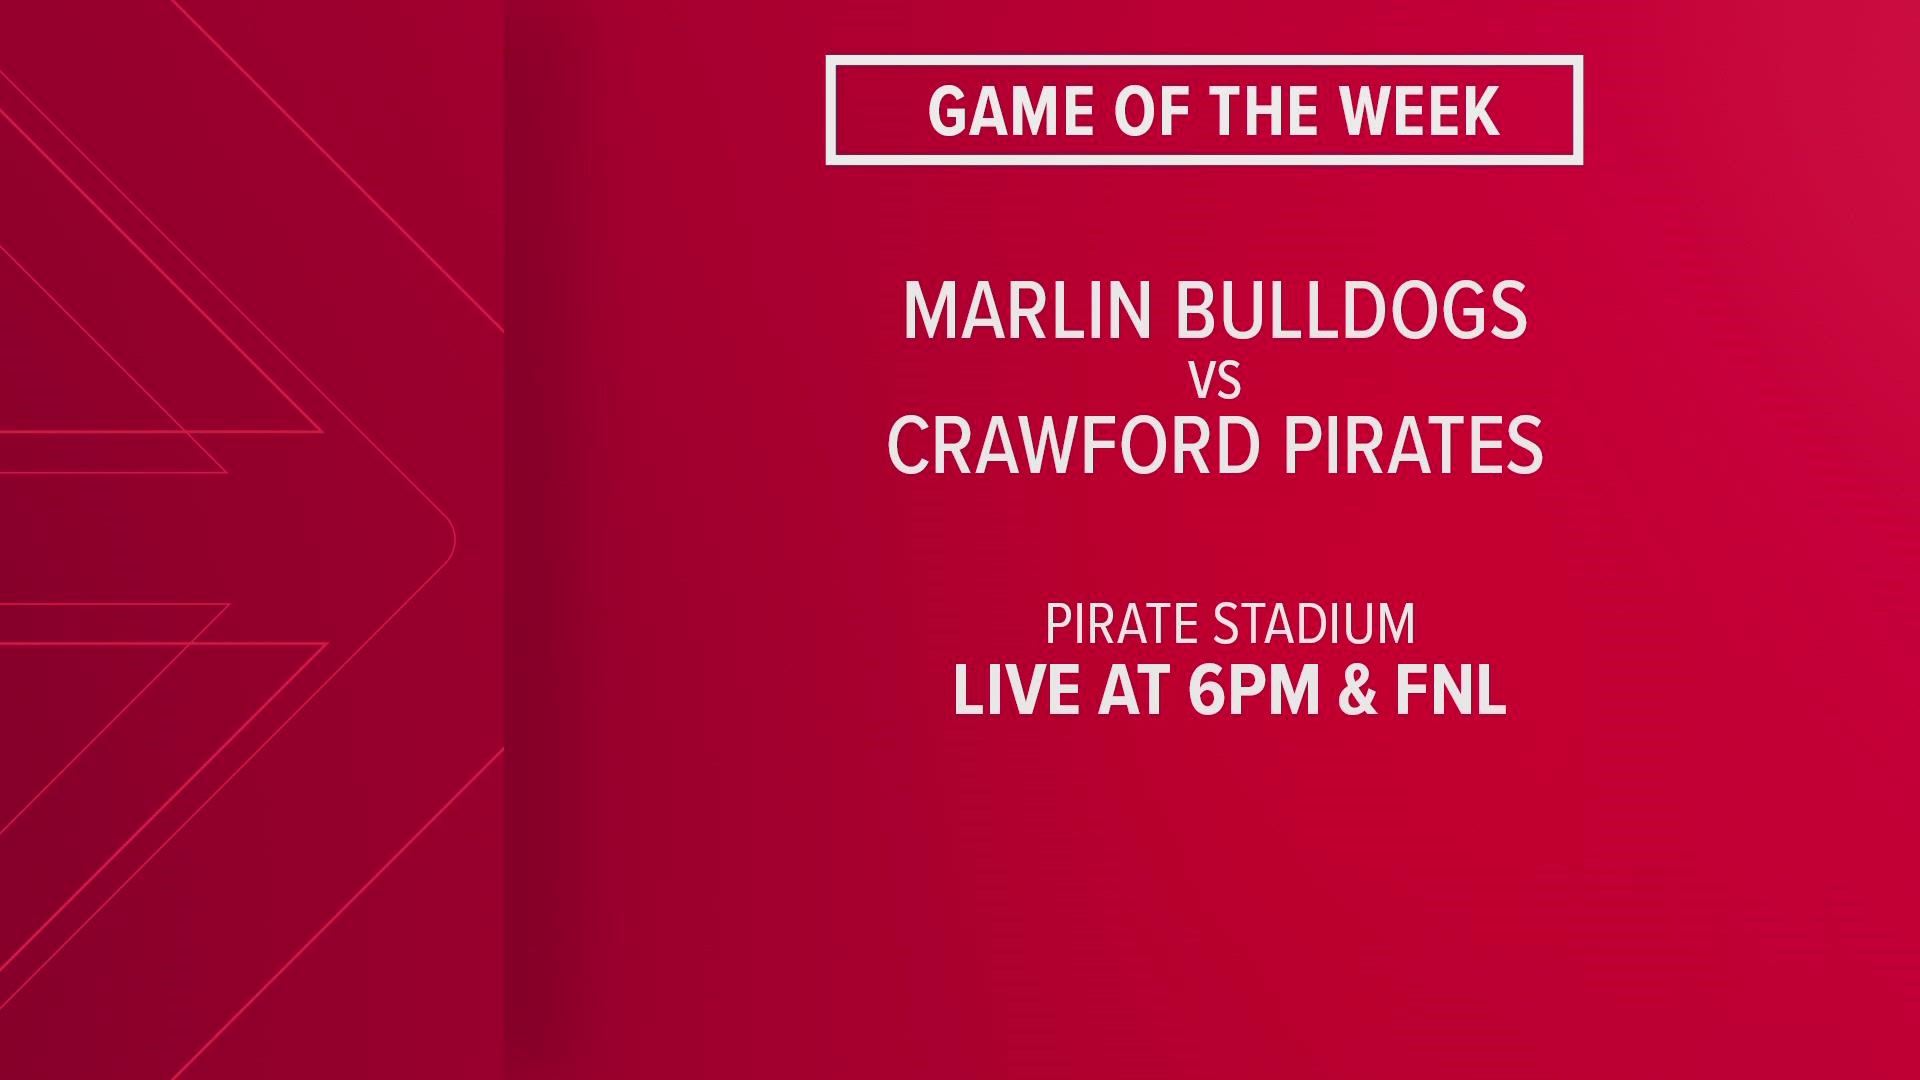 The Marlin Bulldogs will battle the Crawford Pirates in Week 7